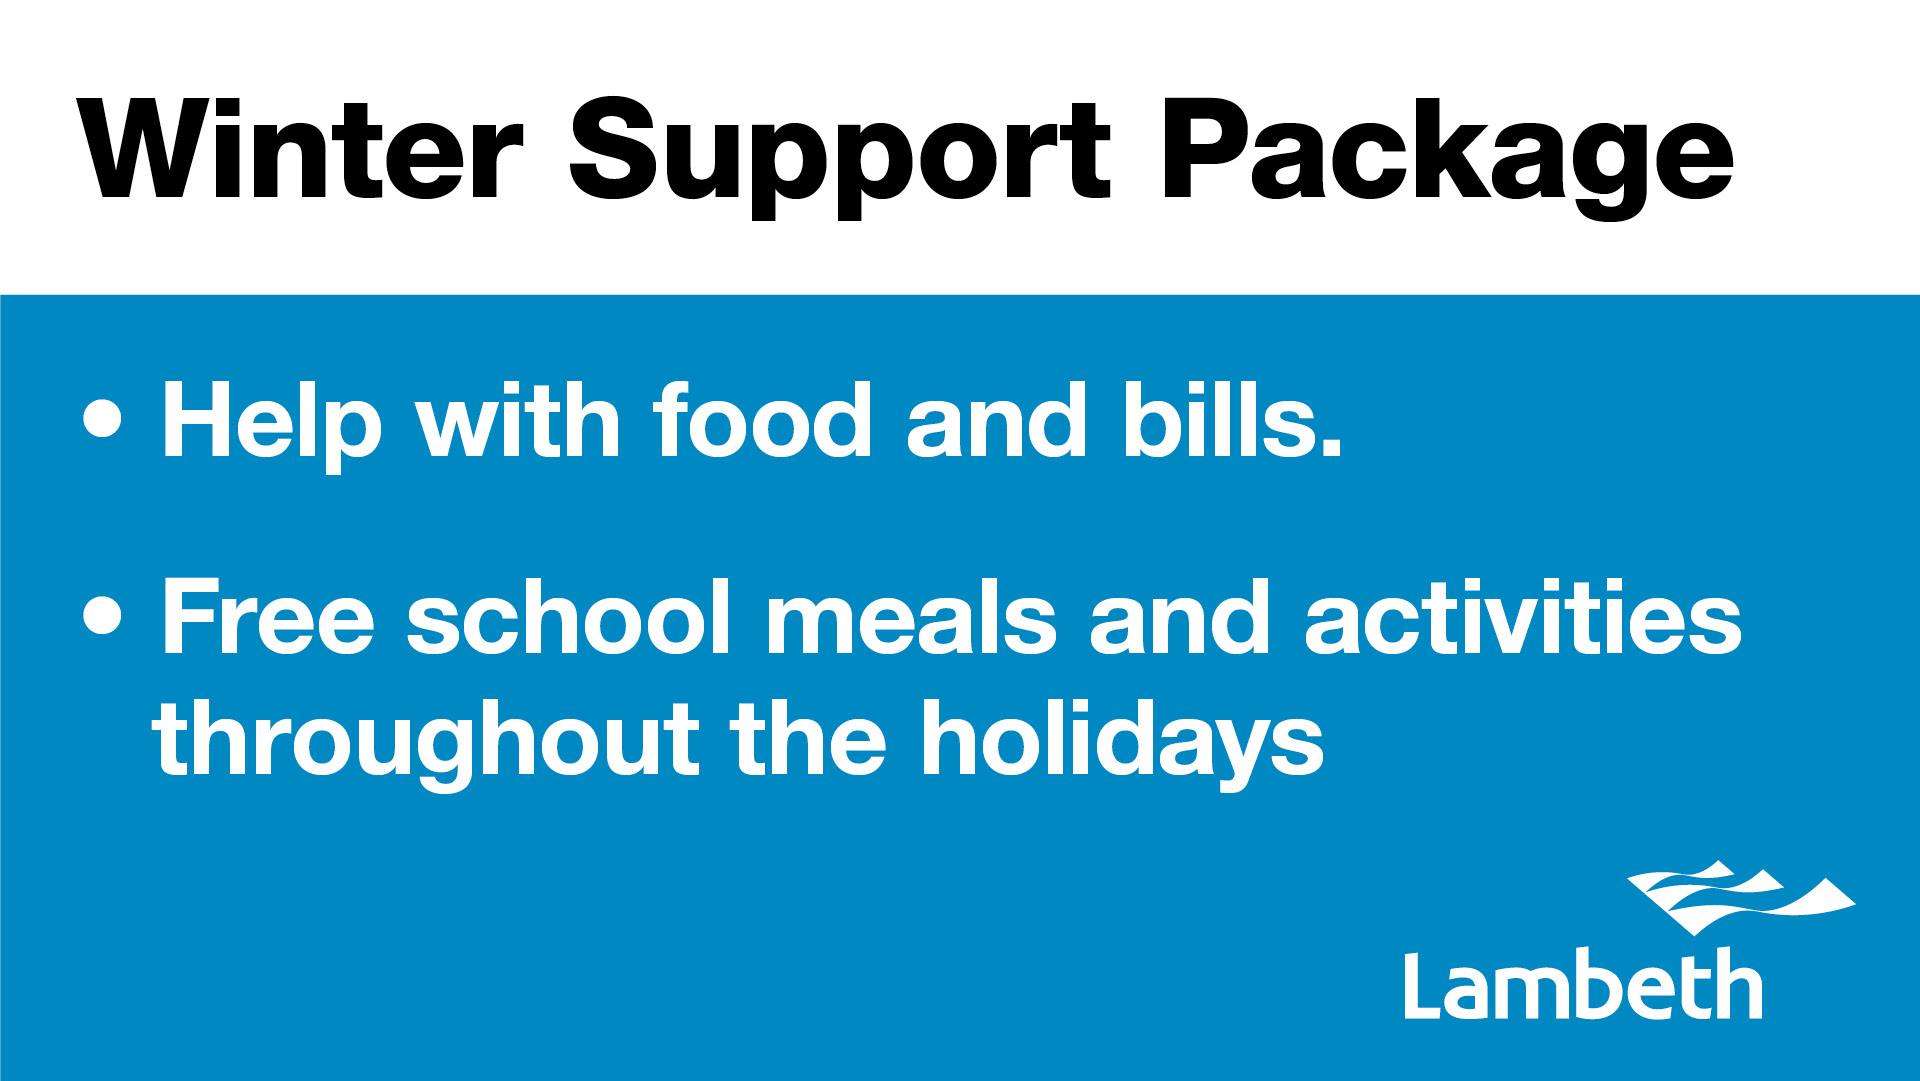 Lambeth: Winter support package help for families in need